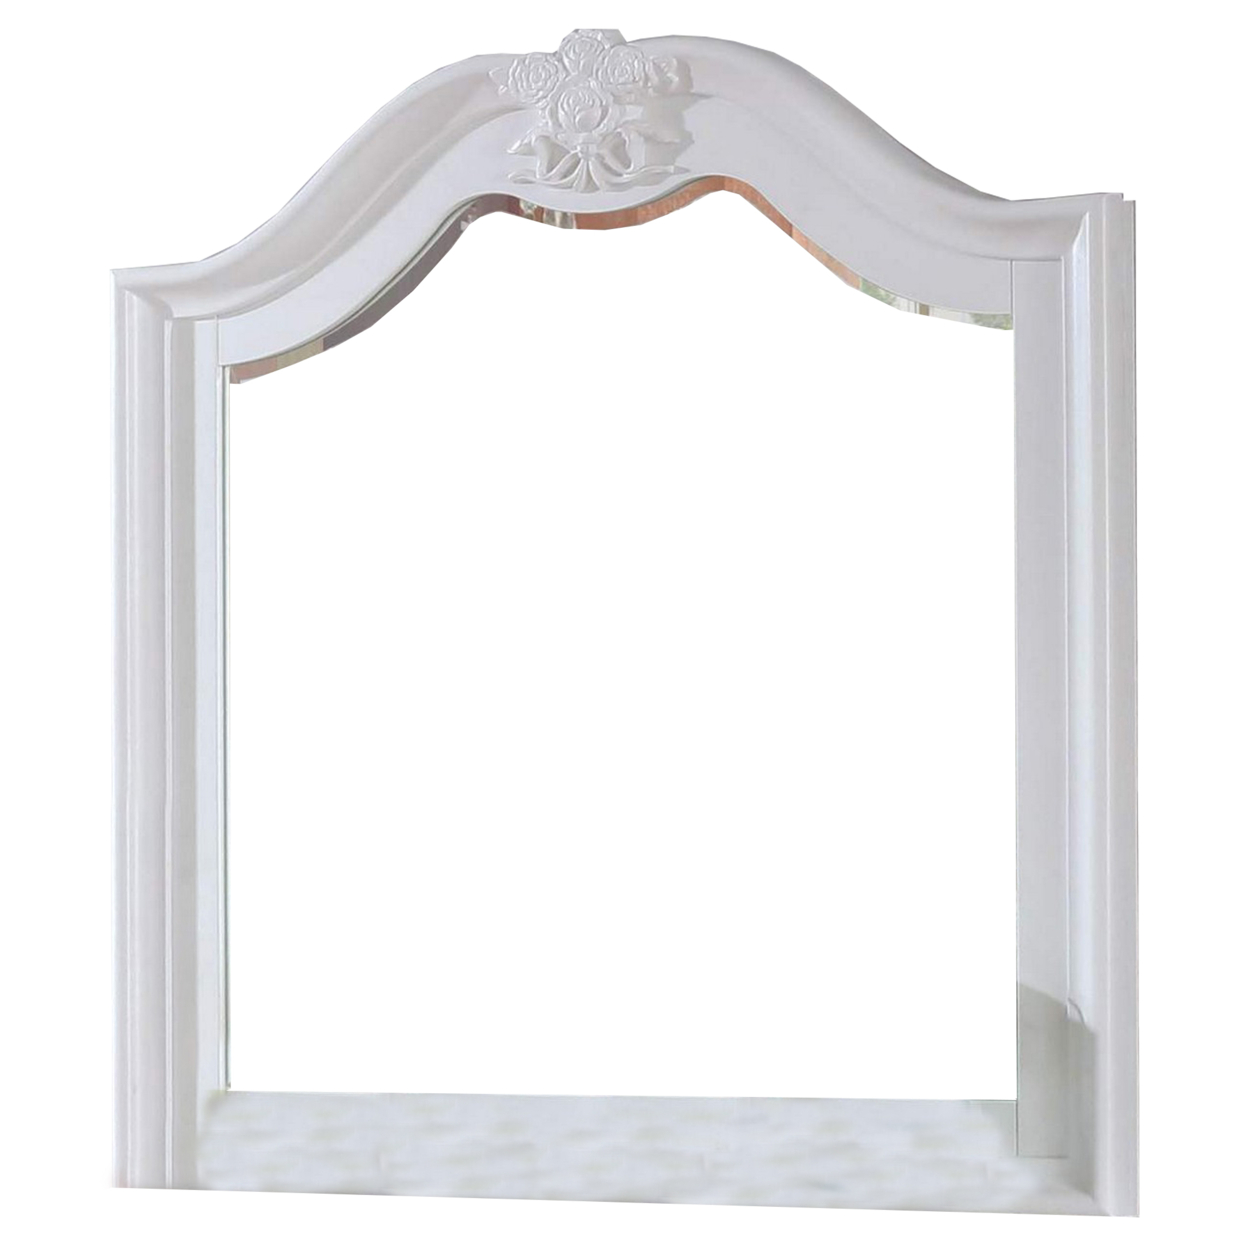 Mirror With Scalloped Frame And Ornate Floral Carving, White- Saltoro Sherpi